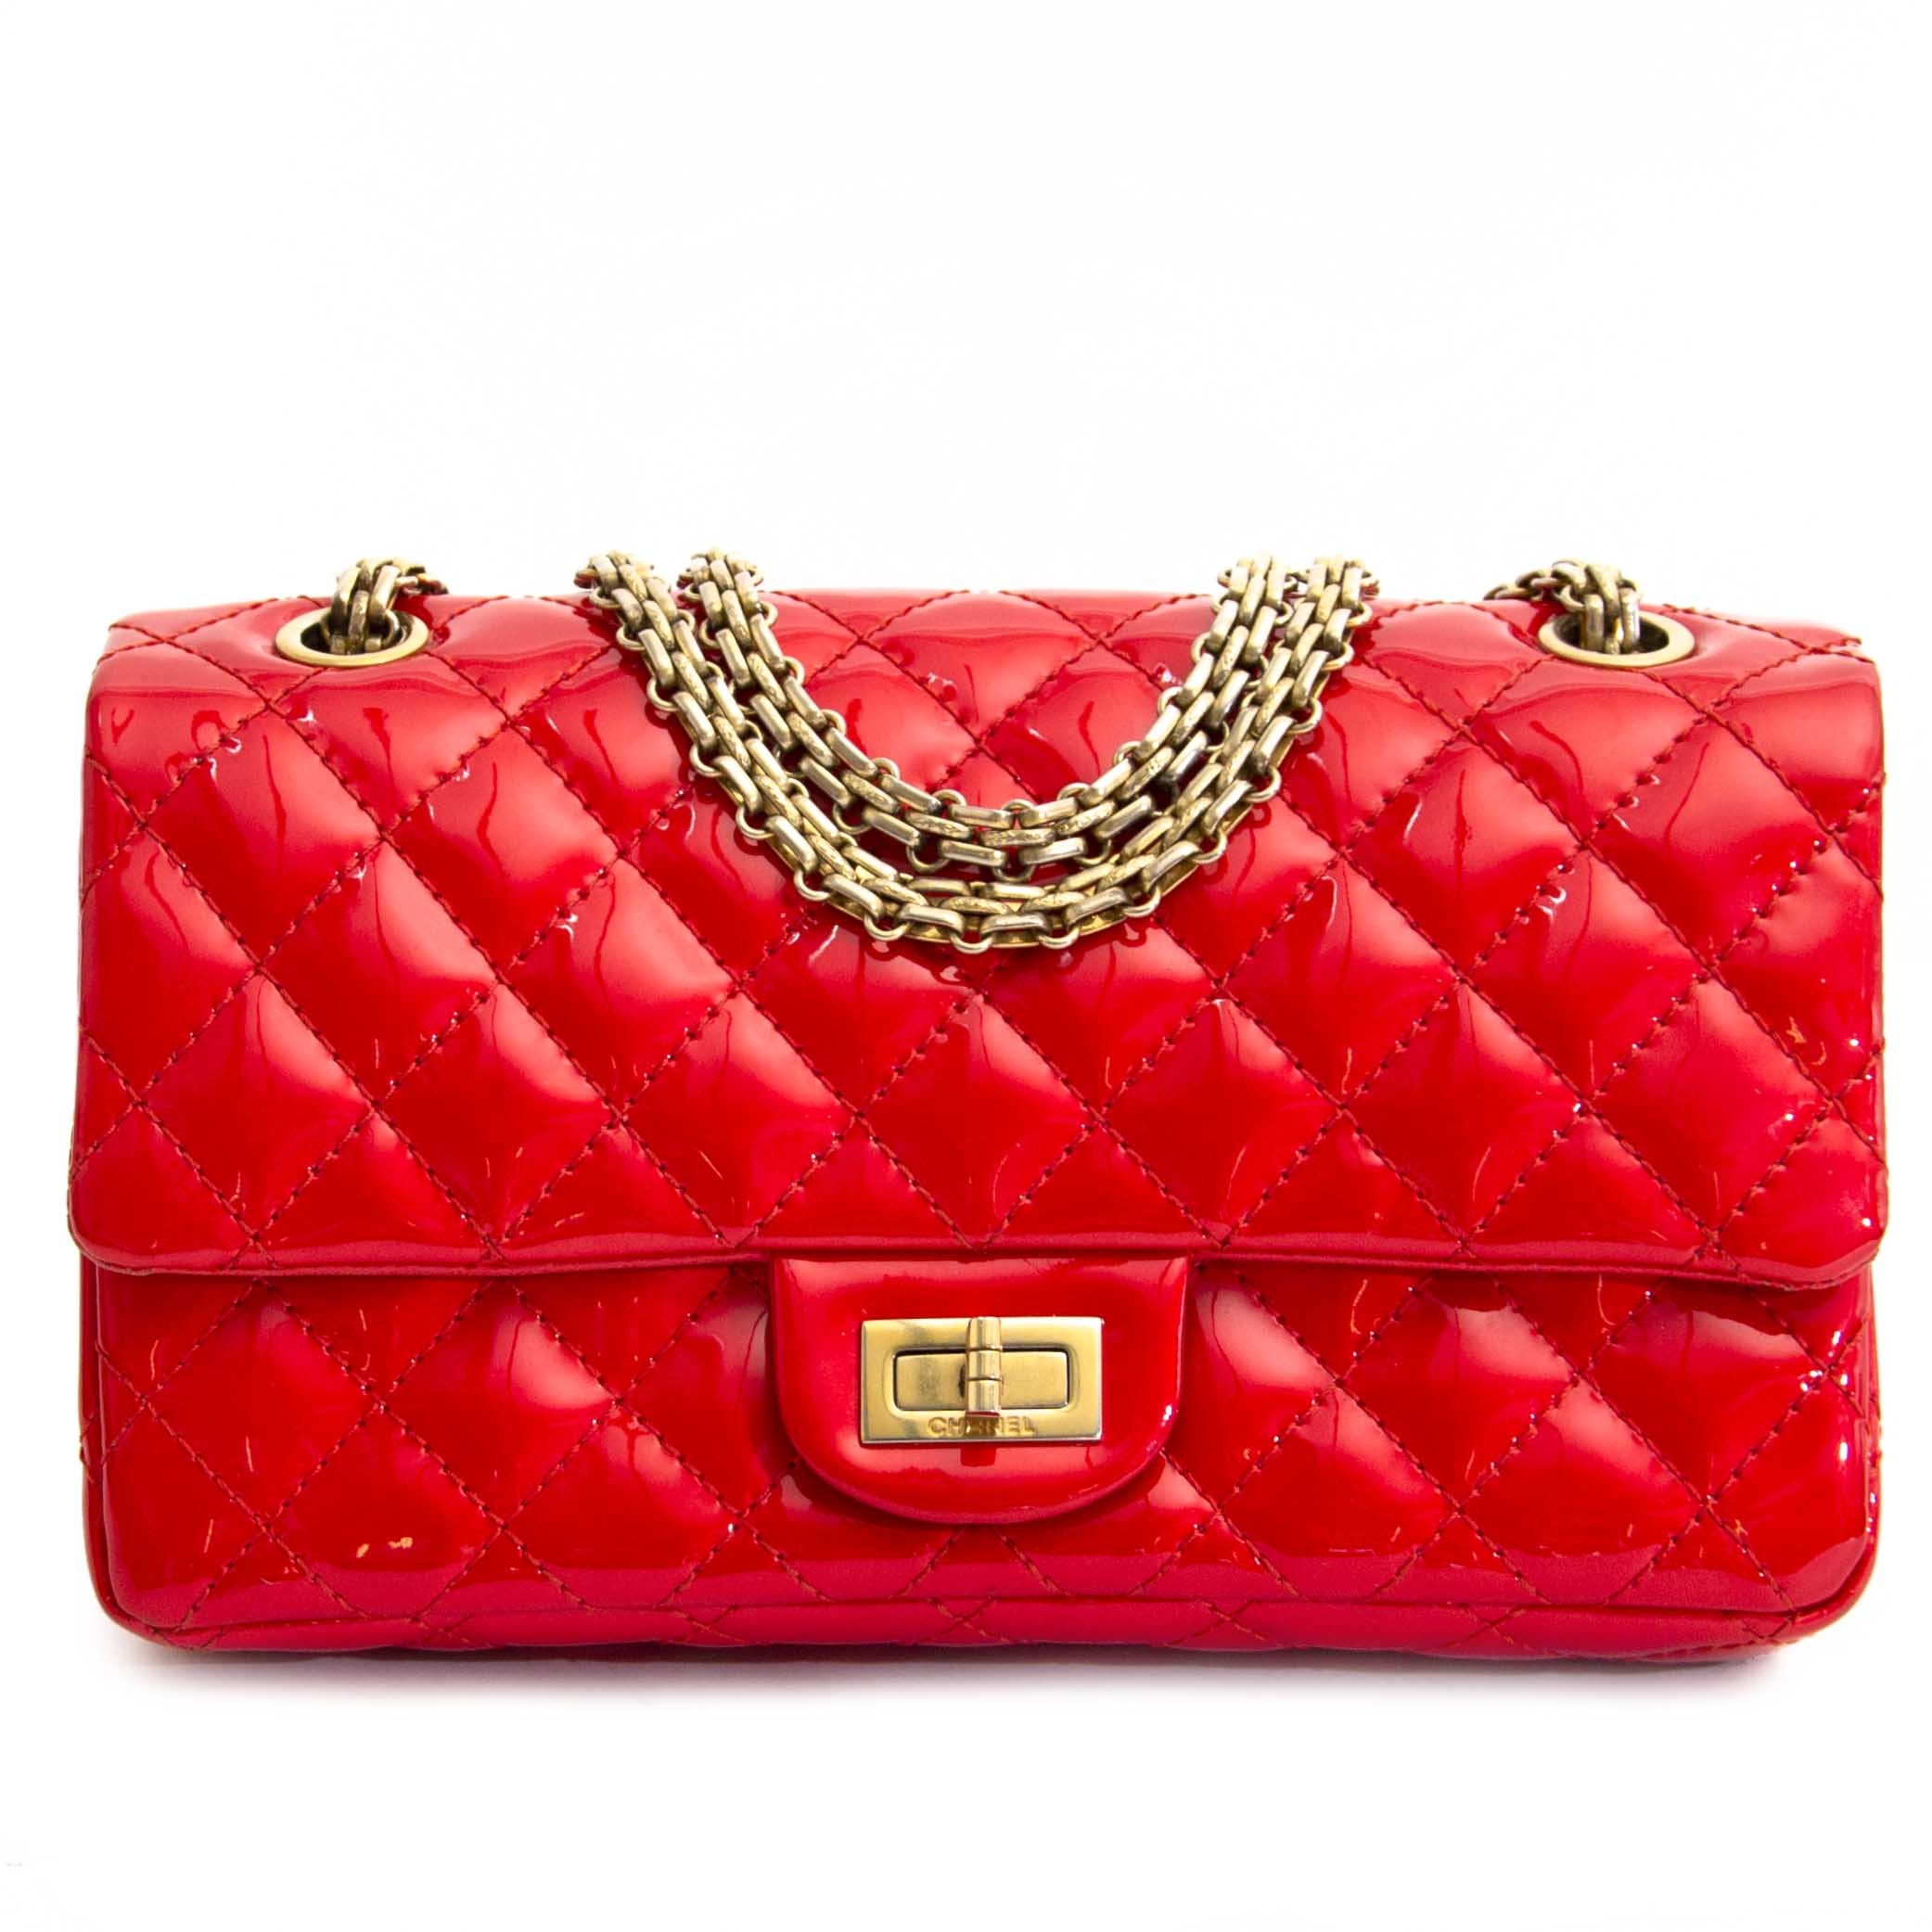 Chanel Quilted Patent Leather 2.55 Reissue Jumbo Flap Bag